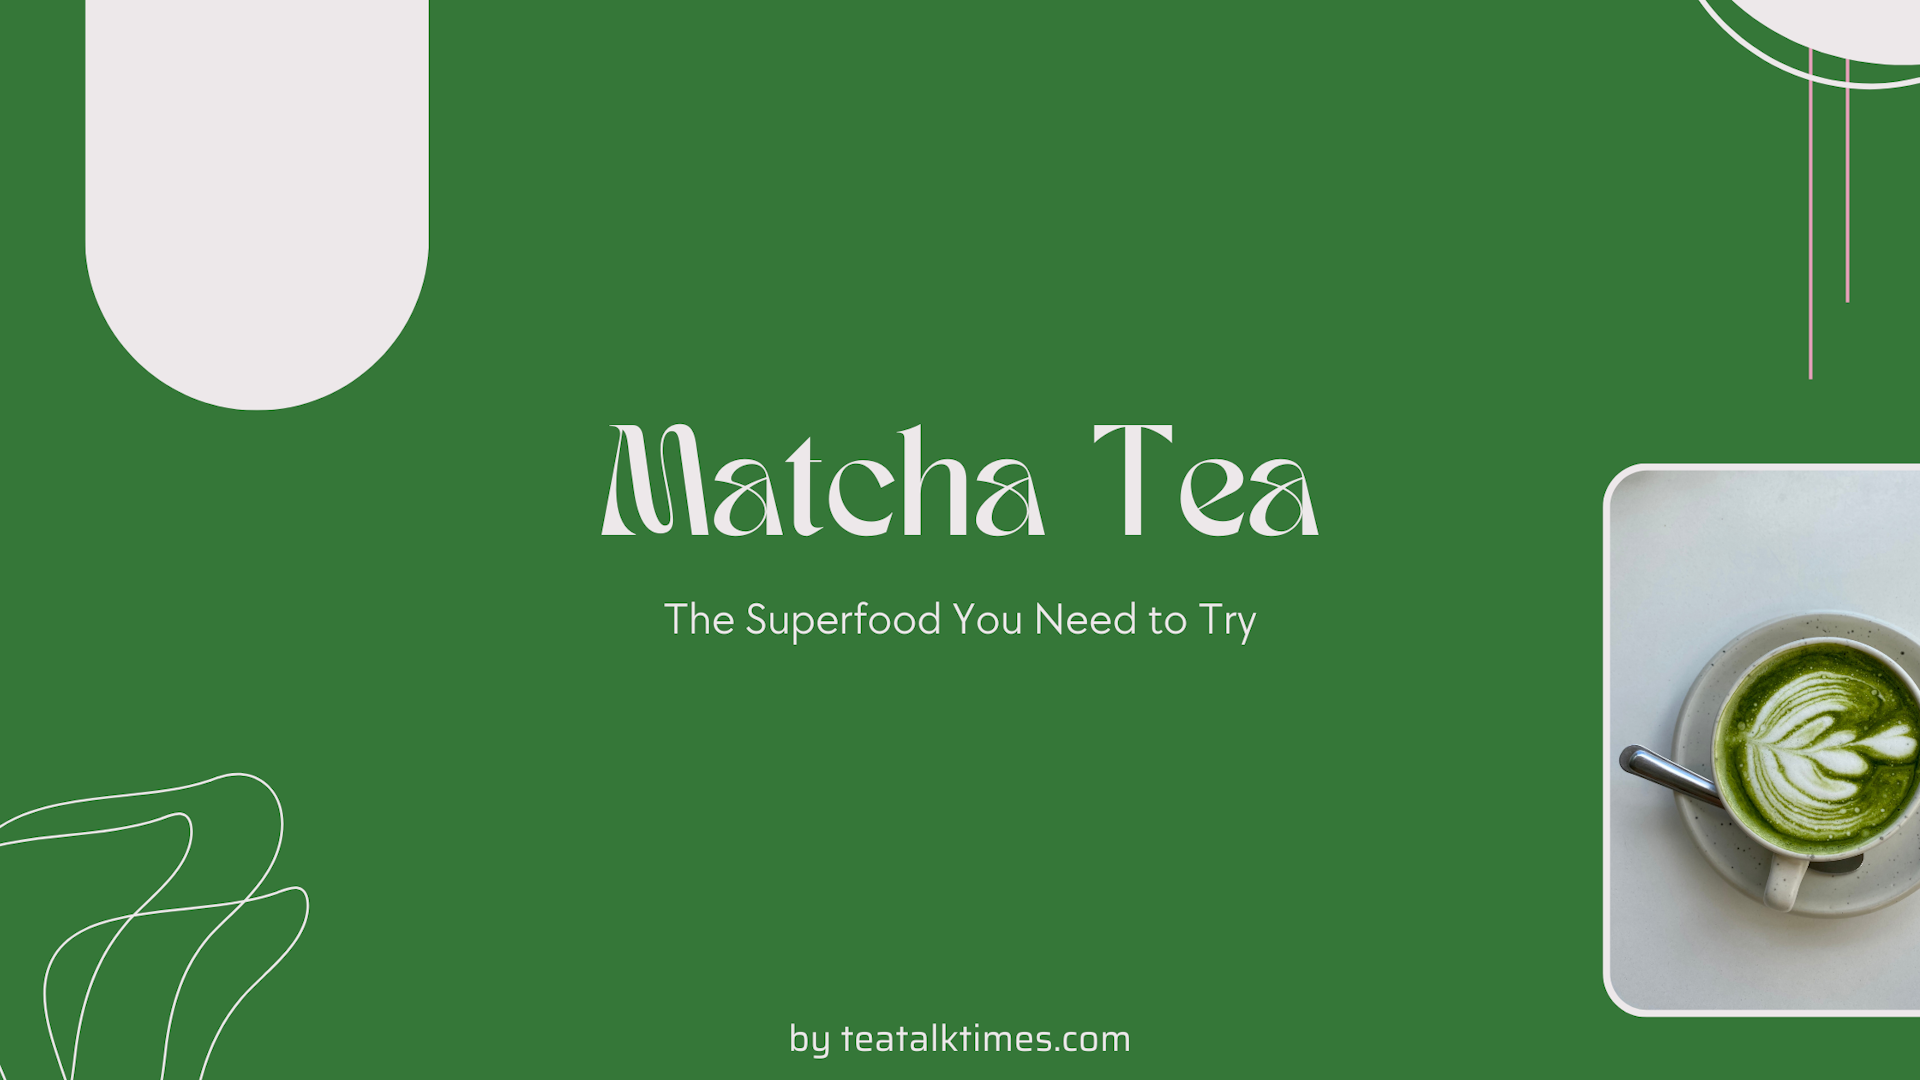 Matcha Tea: The Superfood You Need to Try